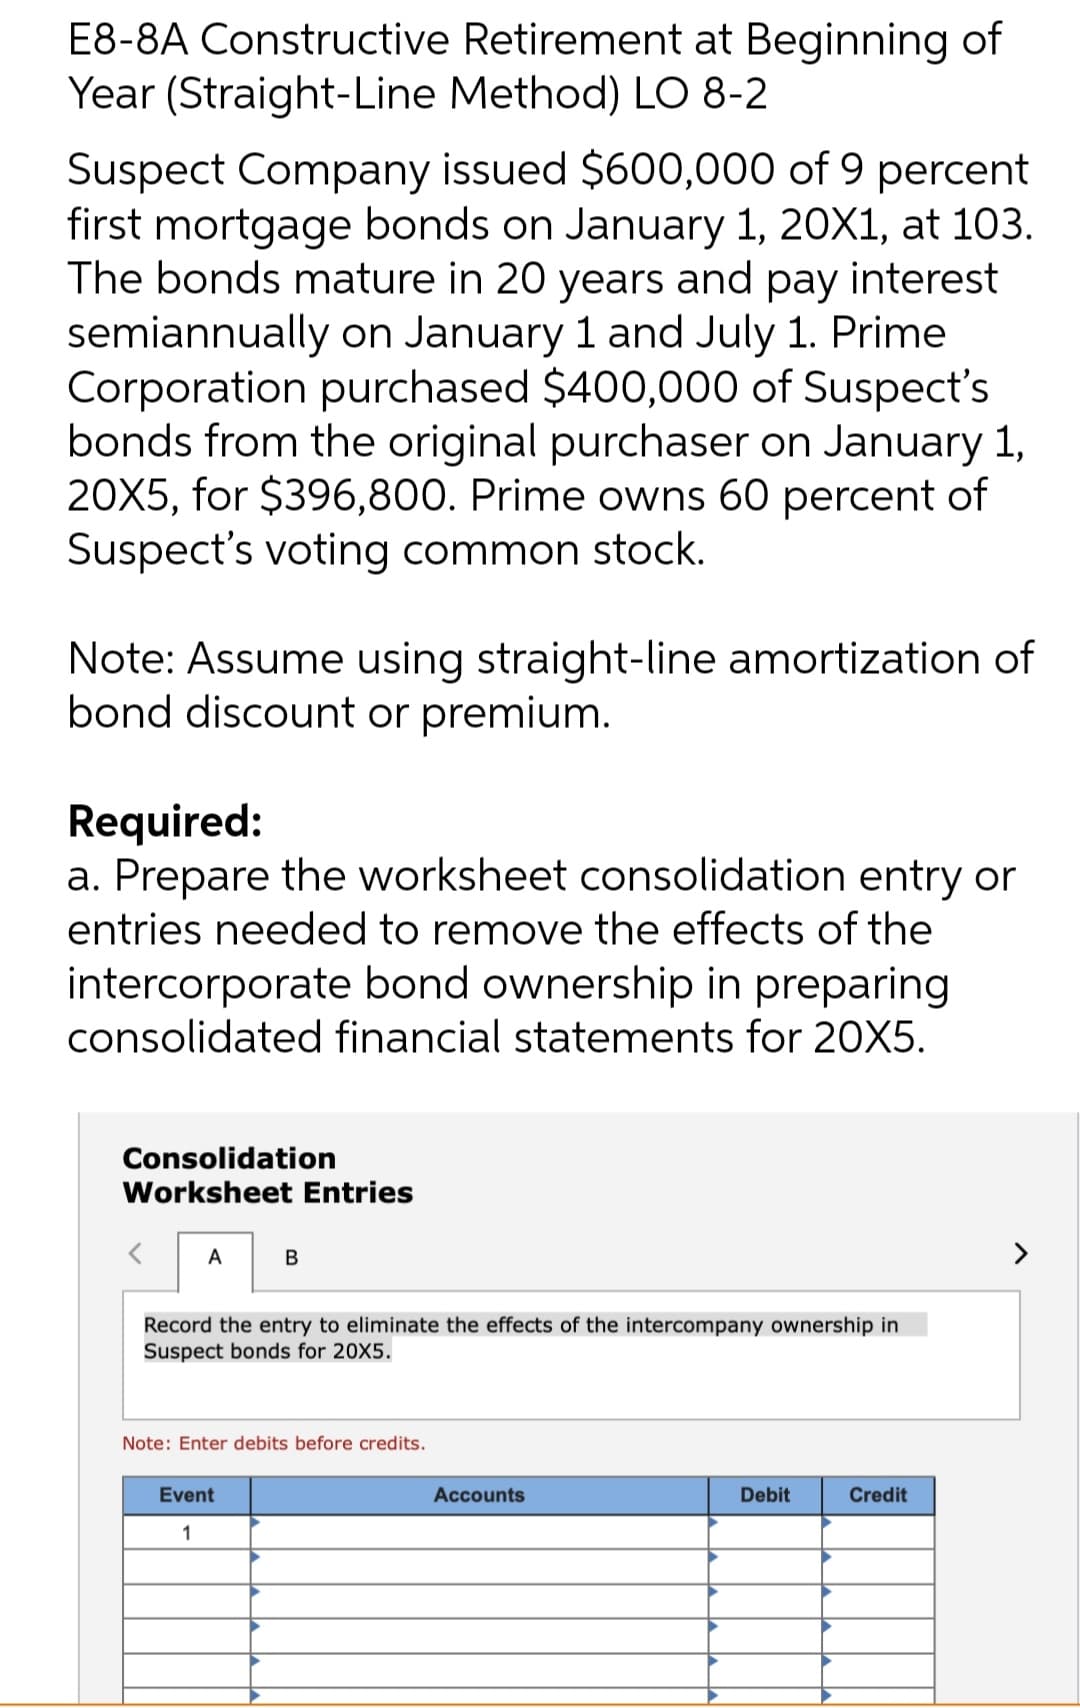 E8-8A Constructive
Year (Straight-Line
Suspect Company issued $600,000 of 9 percent
first mortgage bonds on January 1, 20X1, at 103.
The bonds mature in 20 years and pay interest
semiannually on January 1 and July 1. Prime
Corporation purchased $400,000 of Suspect's
bonds from the original purchaser on January 1,
20X5, for $396,800. Prime owns 60 percent of
Suspect's voting common stock.
Note: Assume using straight-line amortization of
bond discount or premium.
Required:
a. Prepare the worksheet consolidation entry or
entries needed to remove the effects of the
intercorporate bond ownership in preparing
consolidated financial statements for 20X5.
Consolidation
Worksheet Entries
A
Retirement at Beginning of
Method) LO 8-2
B
Record the entry to eliminate the effects of the intercompany ownership in
Suspect bonds for 20X5.
Note: Enter debits before credits.
Event
1
Accounts
Debit
Credit